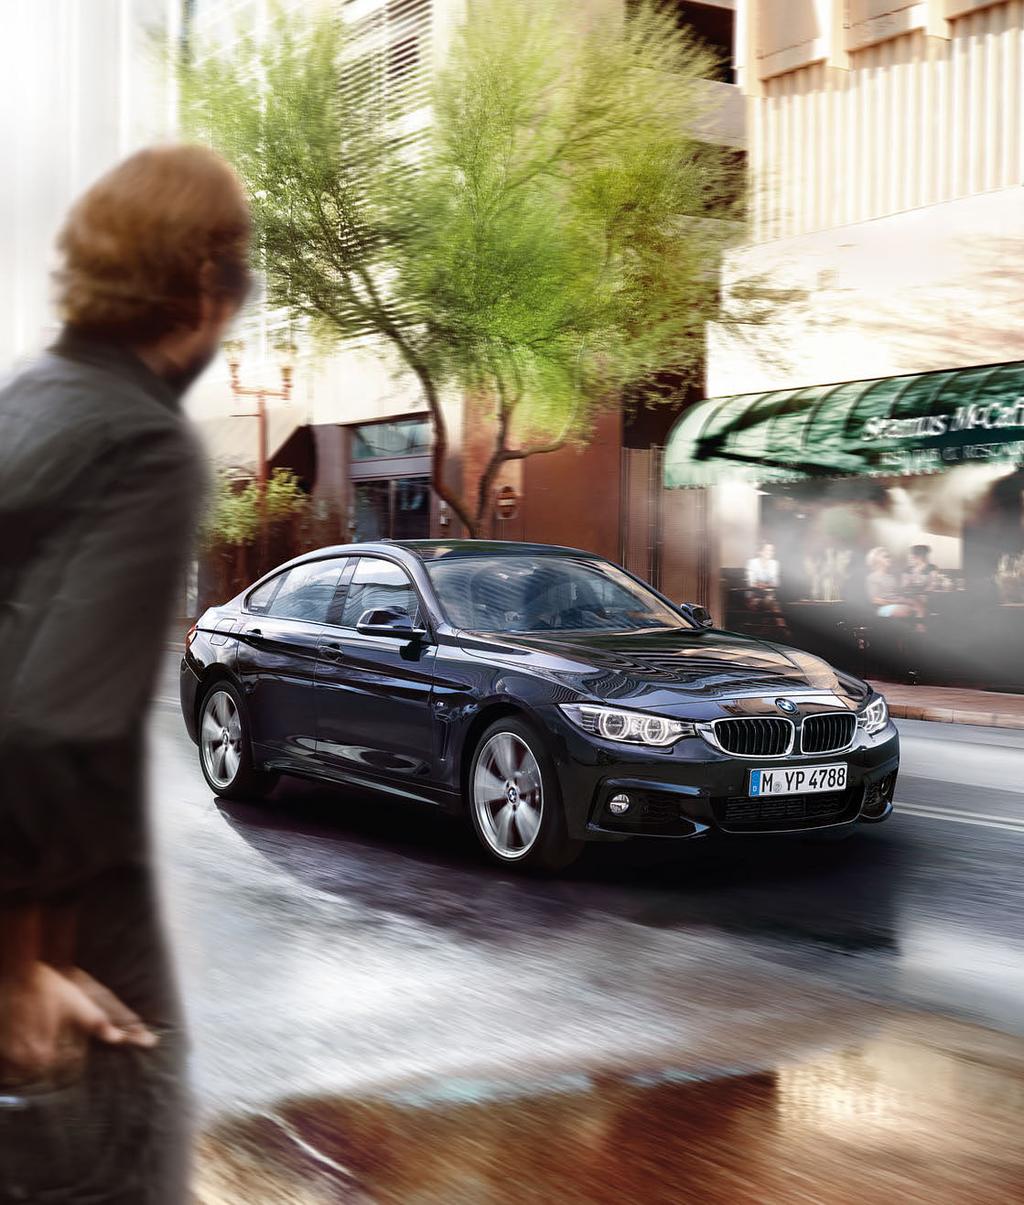 THE CENTRE OF ATTENTION. The BMW 4 Series Gran Coupé combines exceptional charisma and elegance with absolute everyday usability.